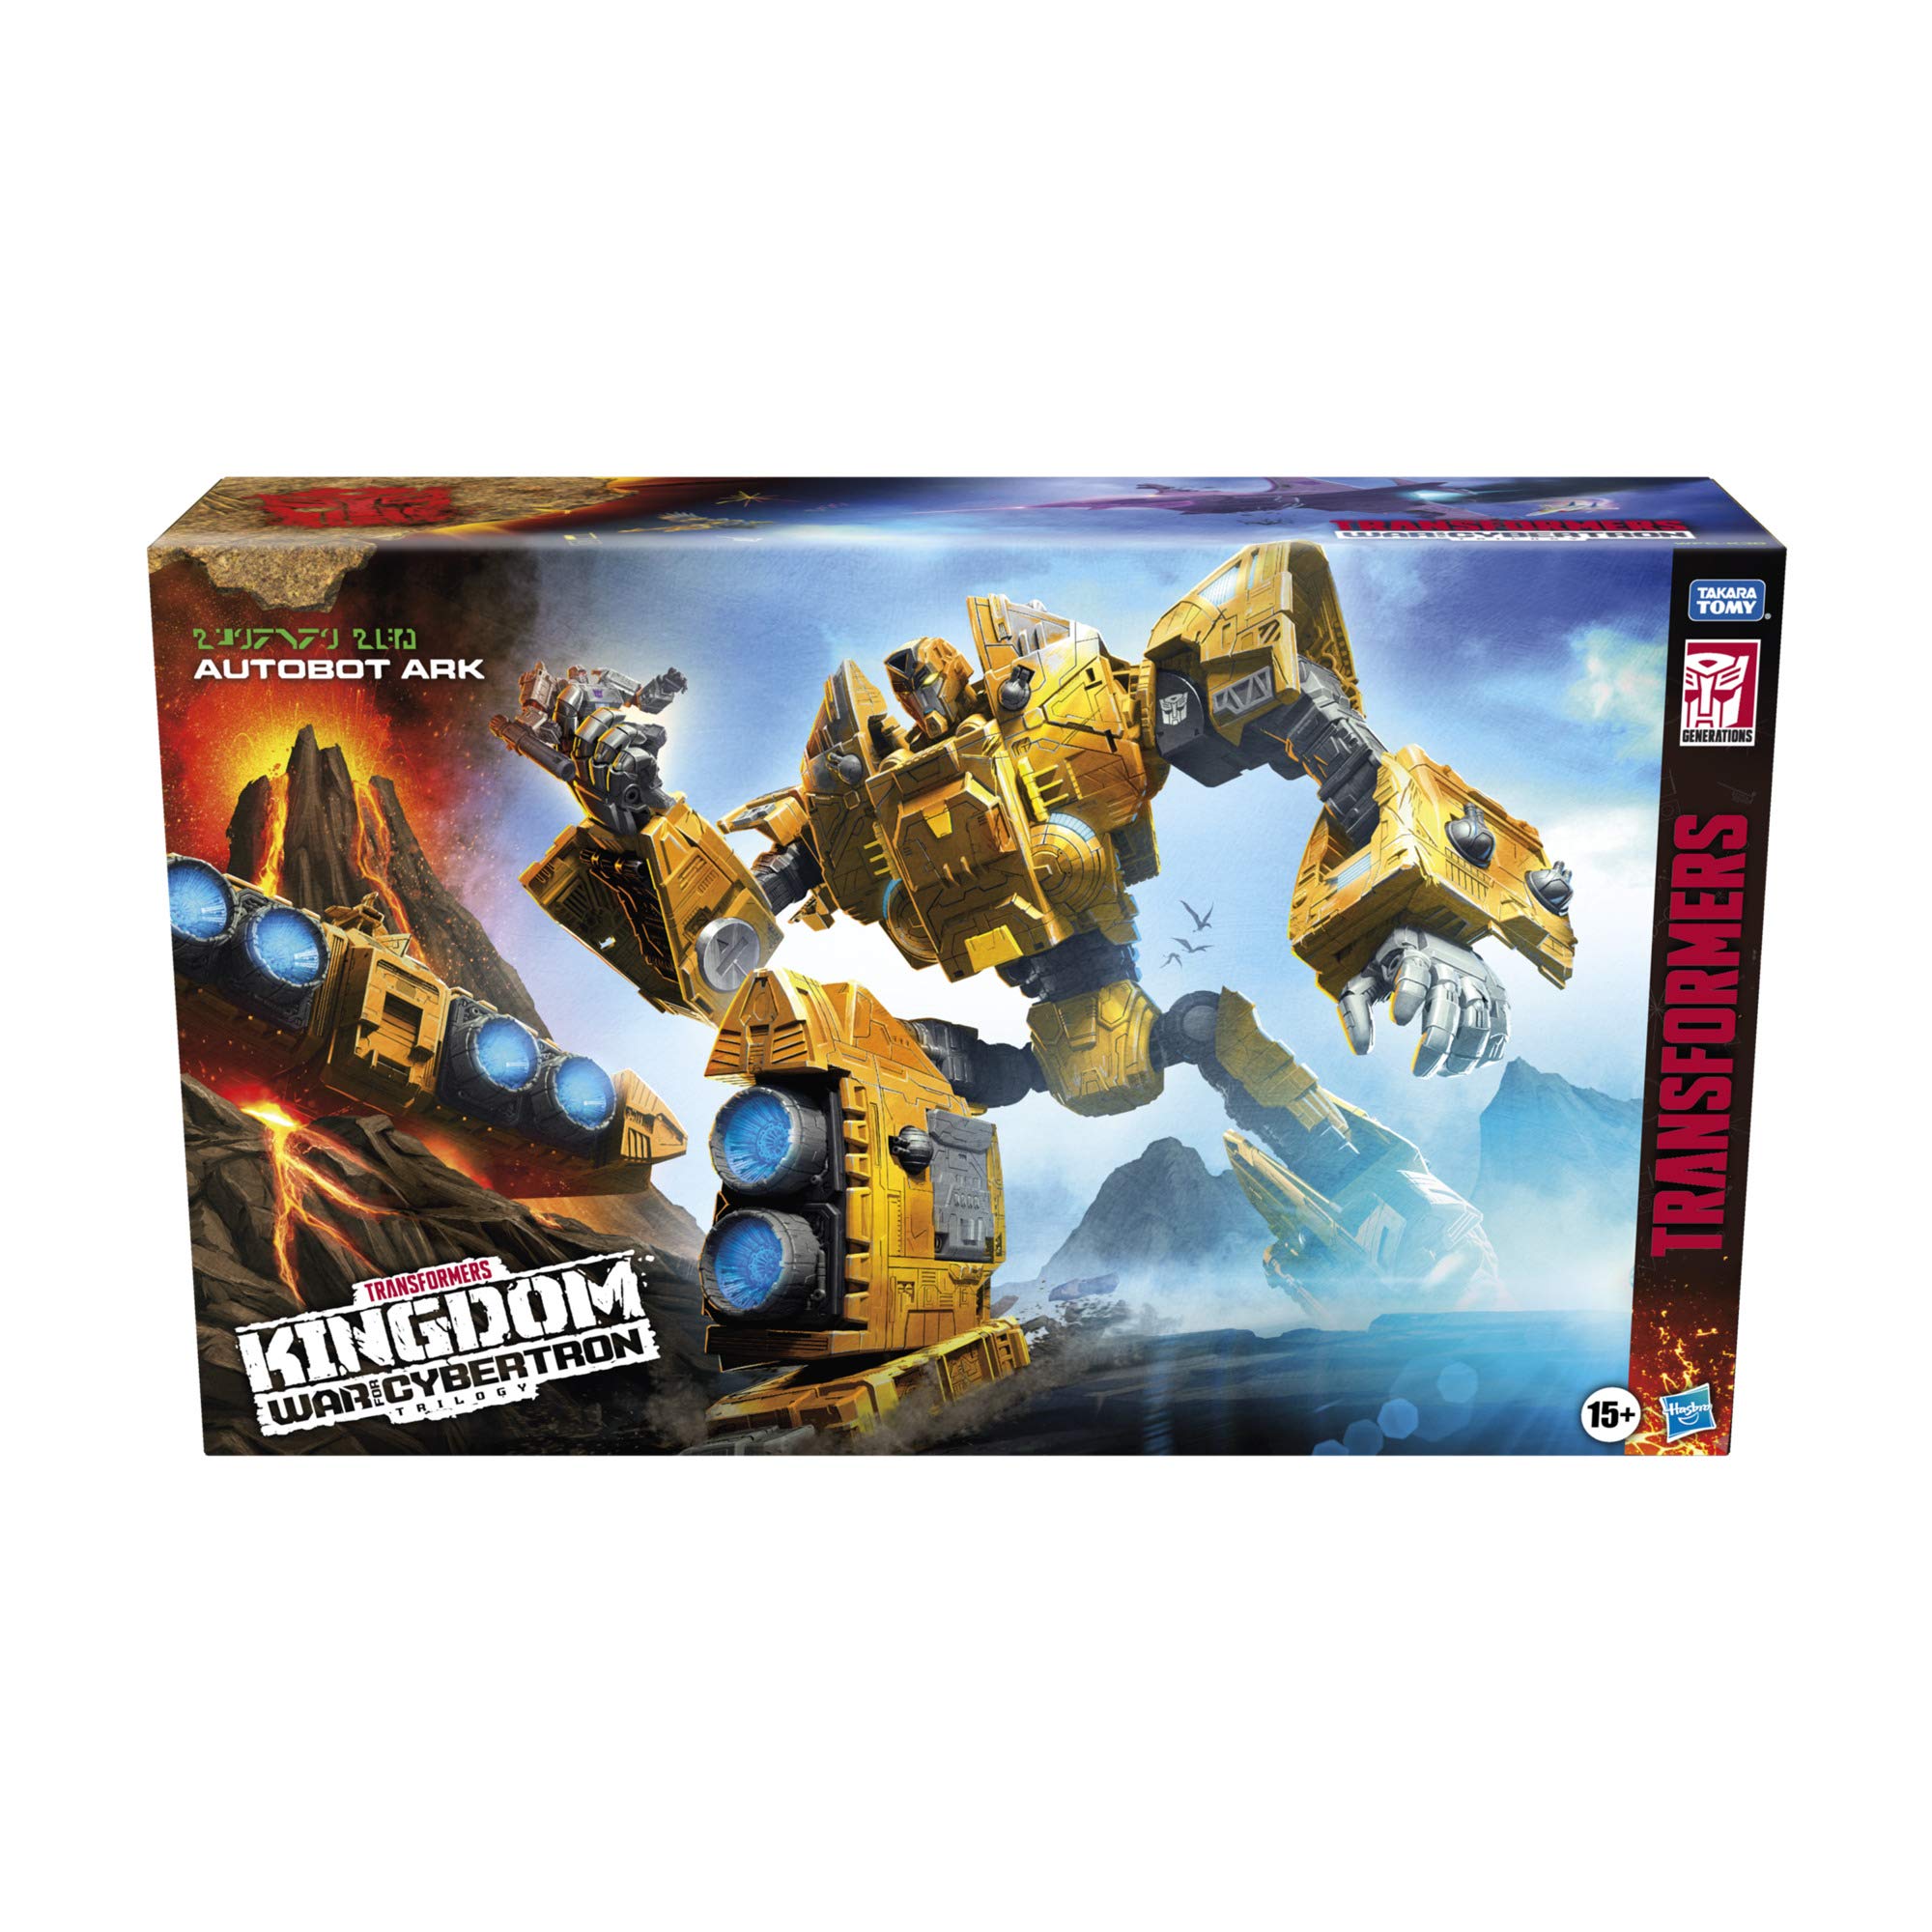 Transformers Toys Generations War for Cybertron: Kingdom Titan WFC-K30 Autobot Ark Action Figure - Kids Ages 15 and Up, 19-inch